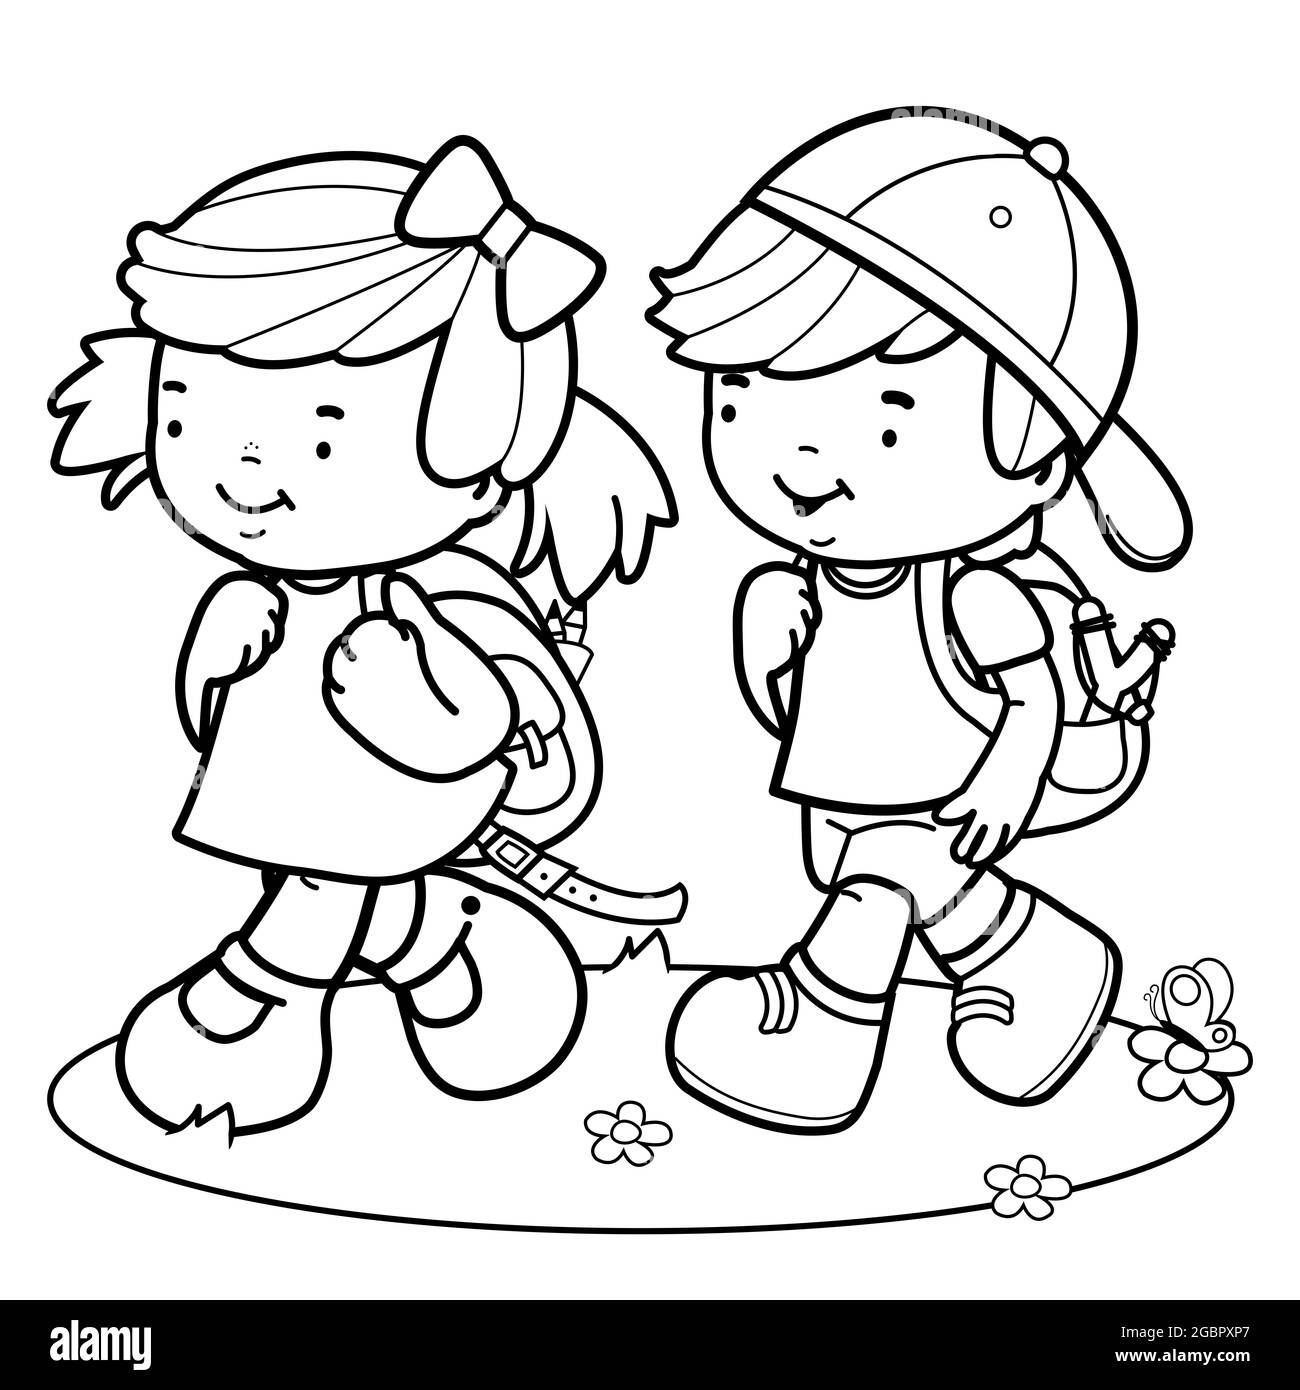 Children walk to school. Black and white coloring page. Stock Photo